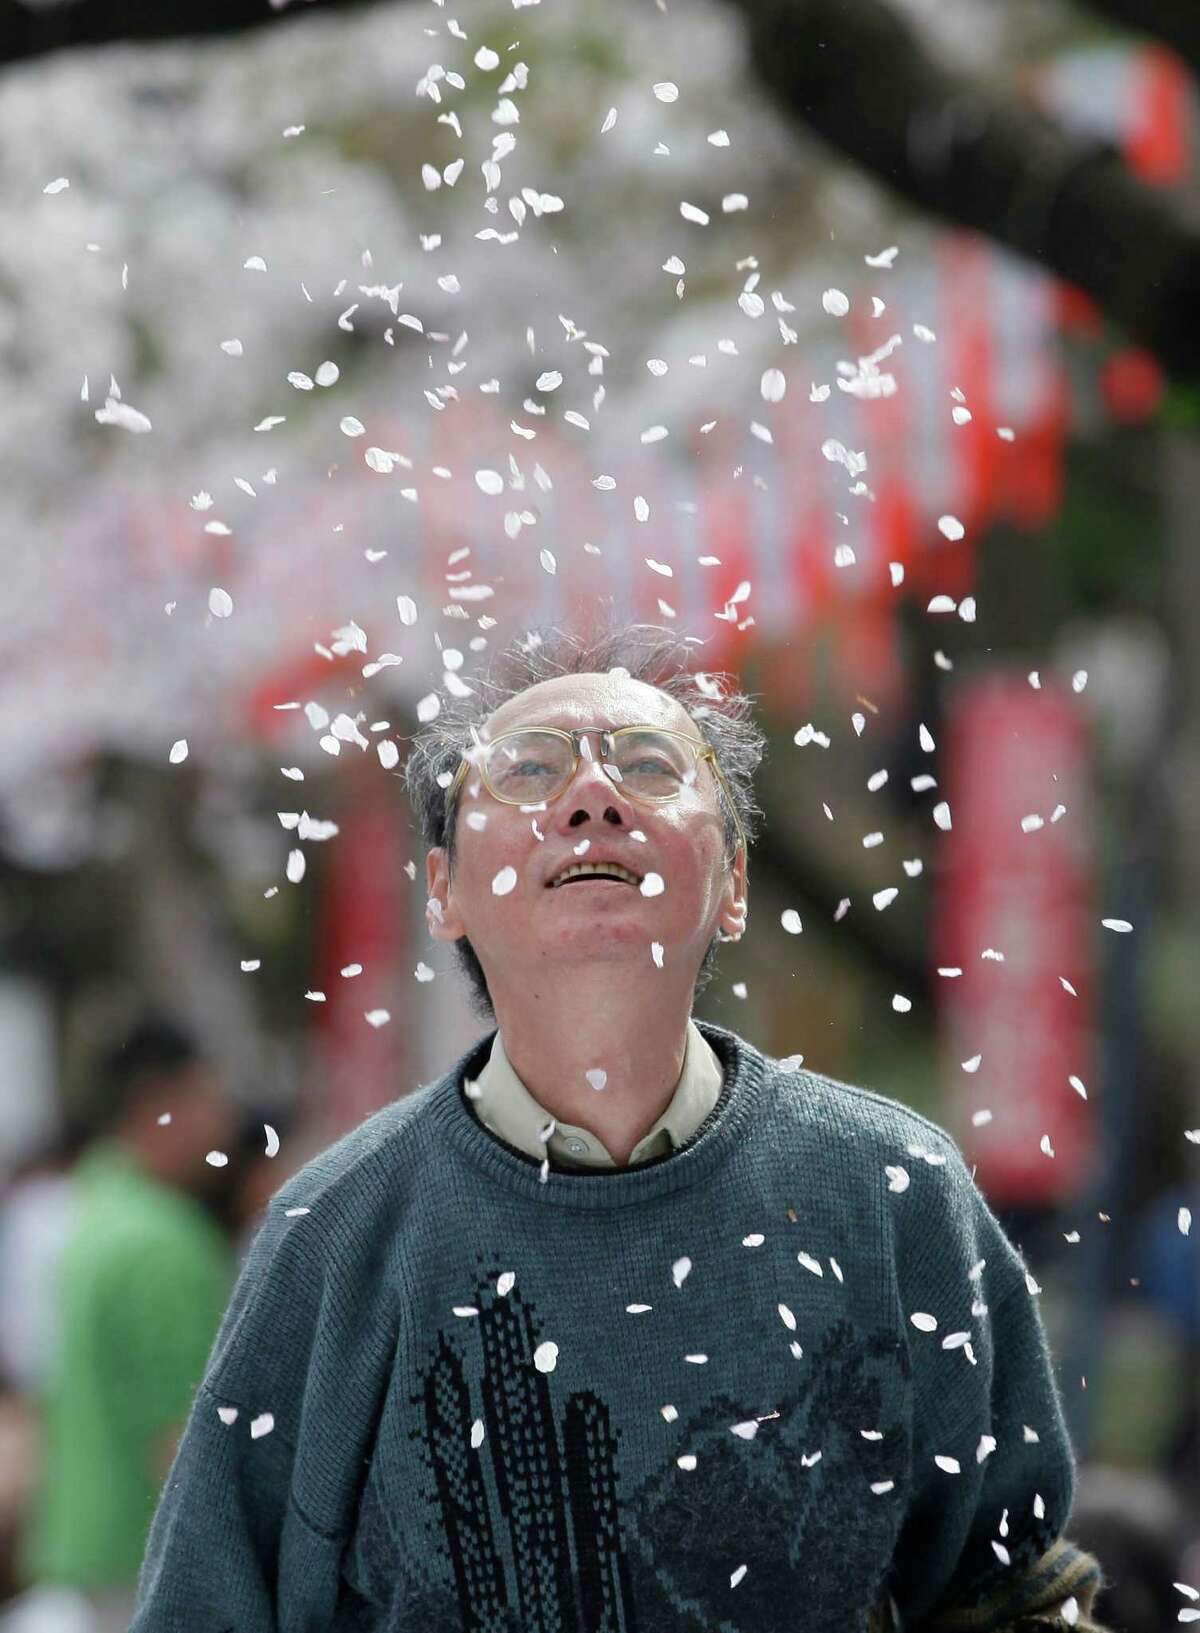 A man admires cherry blossom petals falling as cherry blossoms are in full bloom at Ueno Park in Tokyo,Tuesday, April 10, 2012.